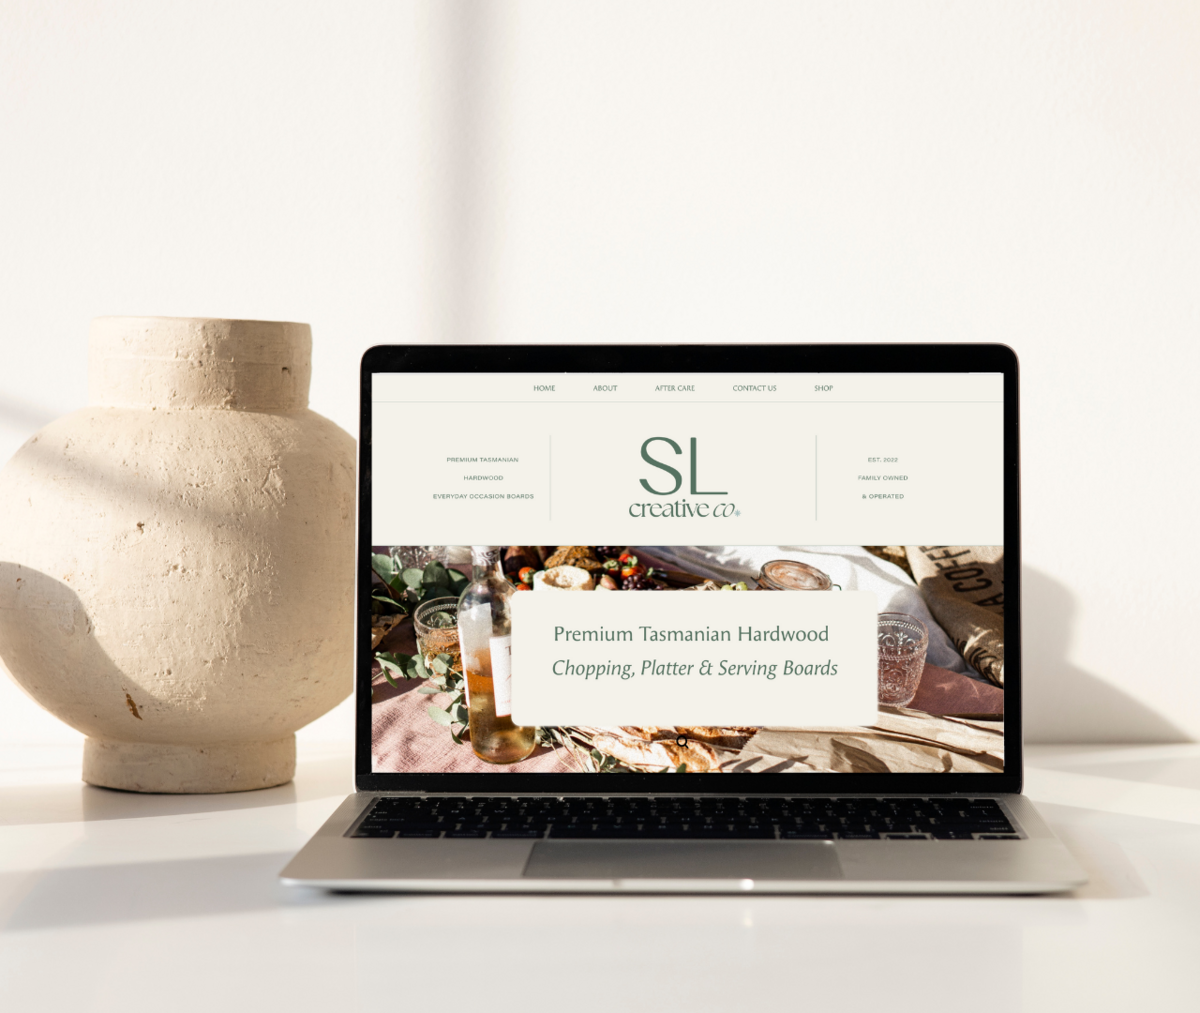 LOCAL SMALL BUSINESS LOCAL SL CREATIE CO BRANDING ESCAPING ORDINARY DIGITAL WEBSITE DESIGN  SEO AND BRANDING FOR SMALL BUSINESS ALBURY WODONGA AUSTRALIAjkl blinds and shutters website by escaping ordinary digial albury wodonga